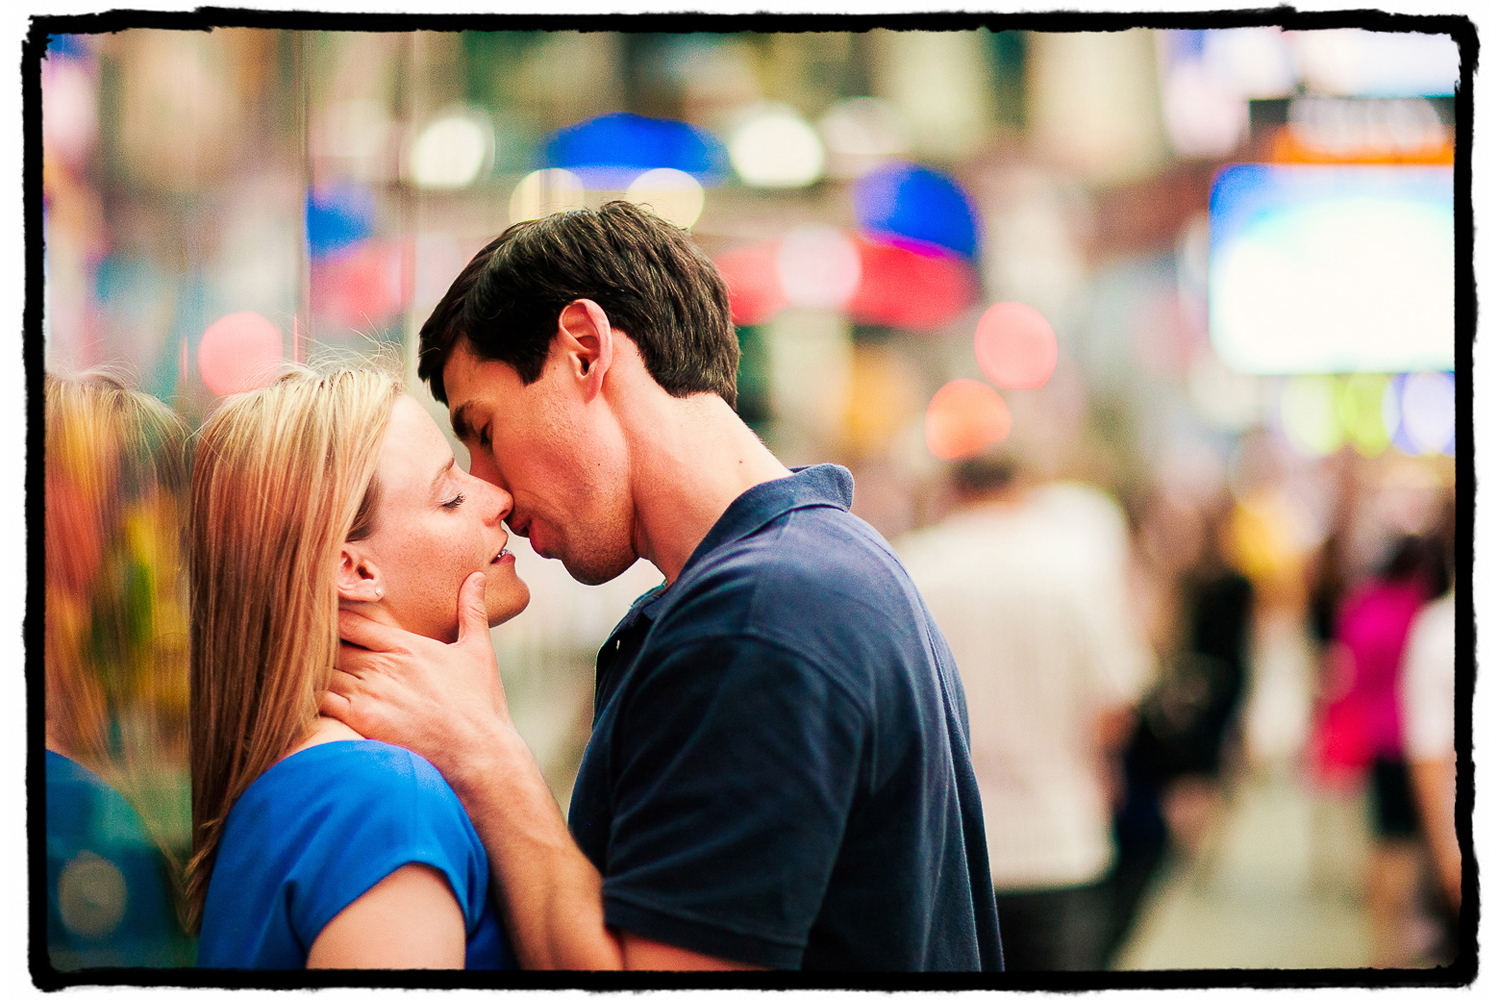 Engagement Portrait: Seth kisses Jennifer in a romantic moment amidst the activity and color of Times Square.